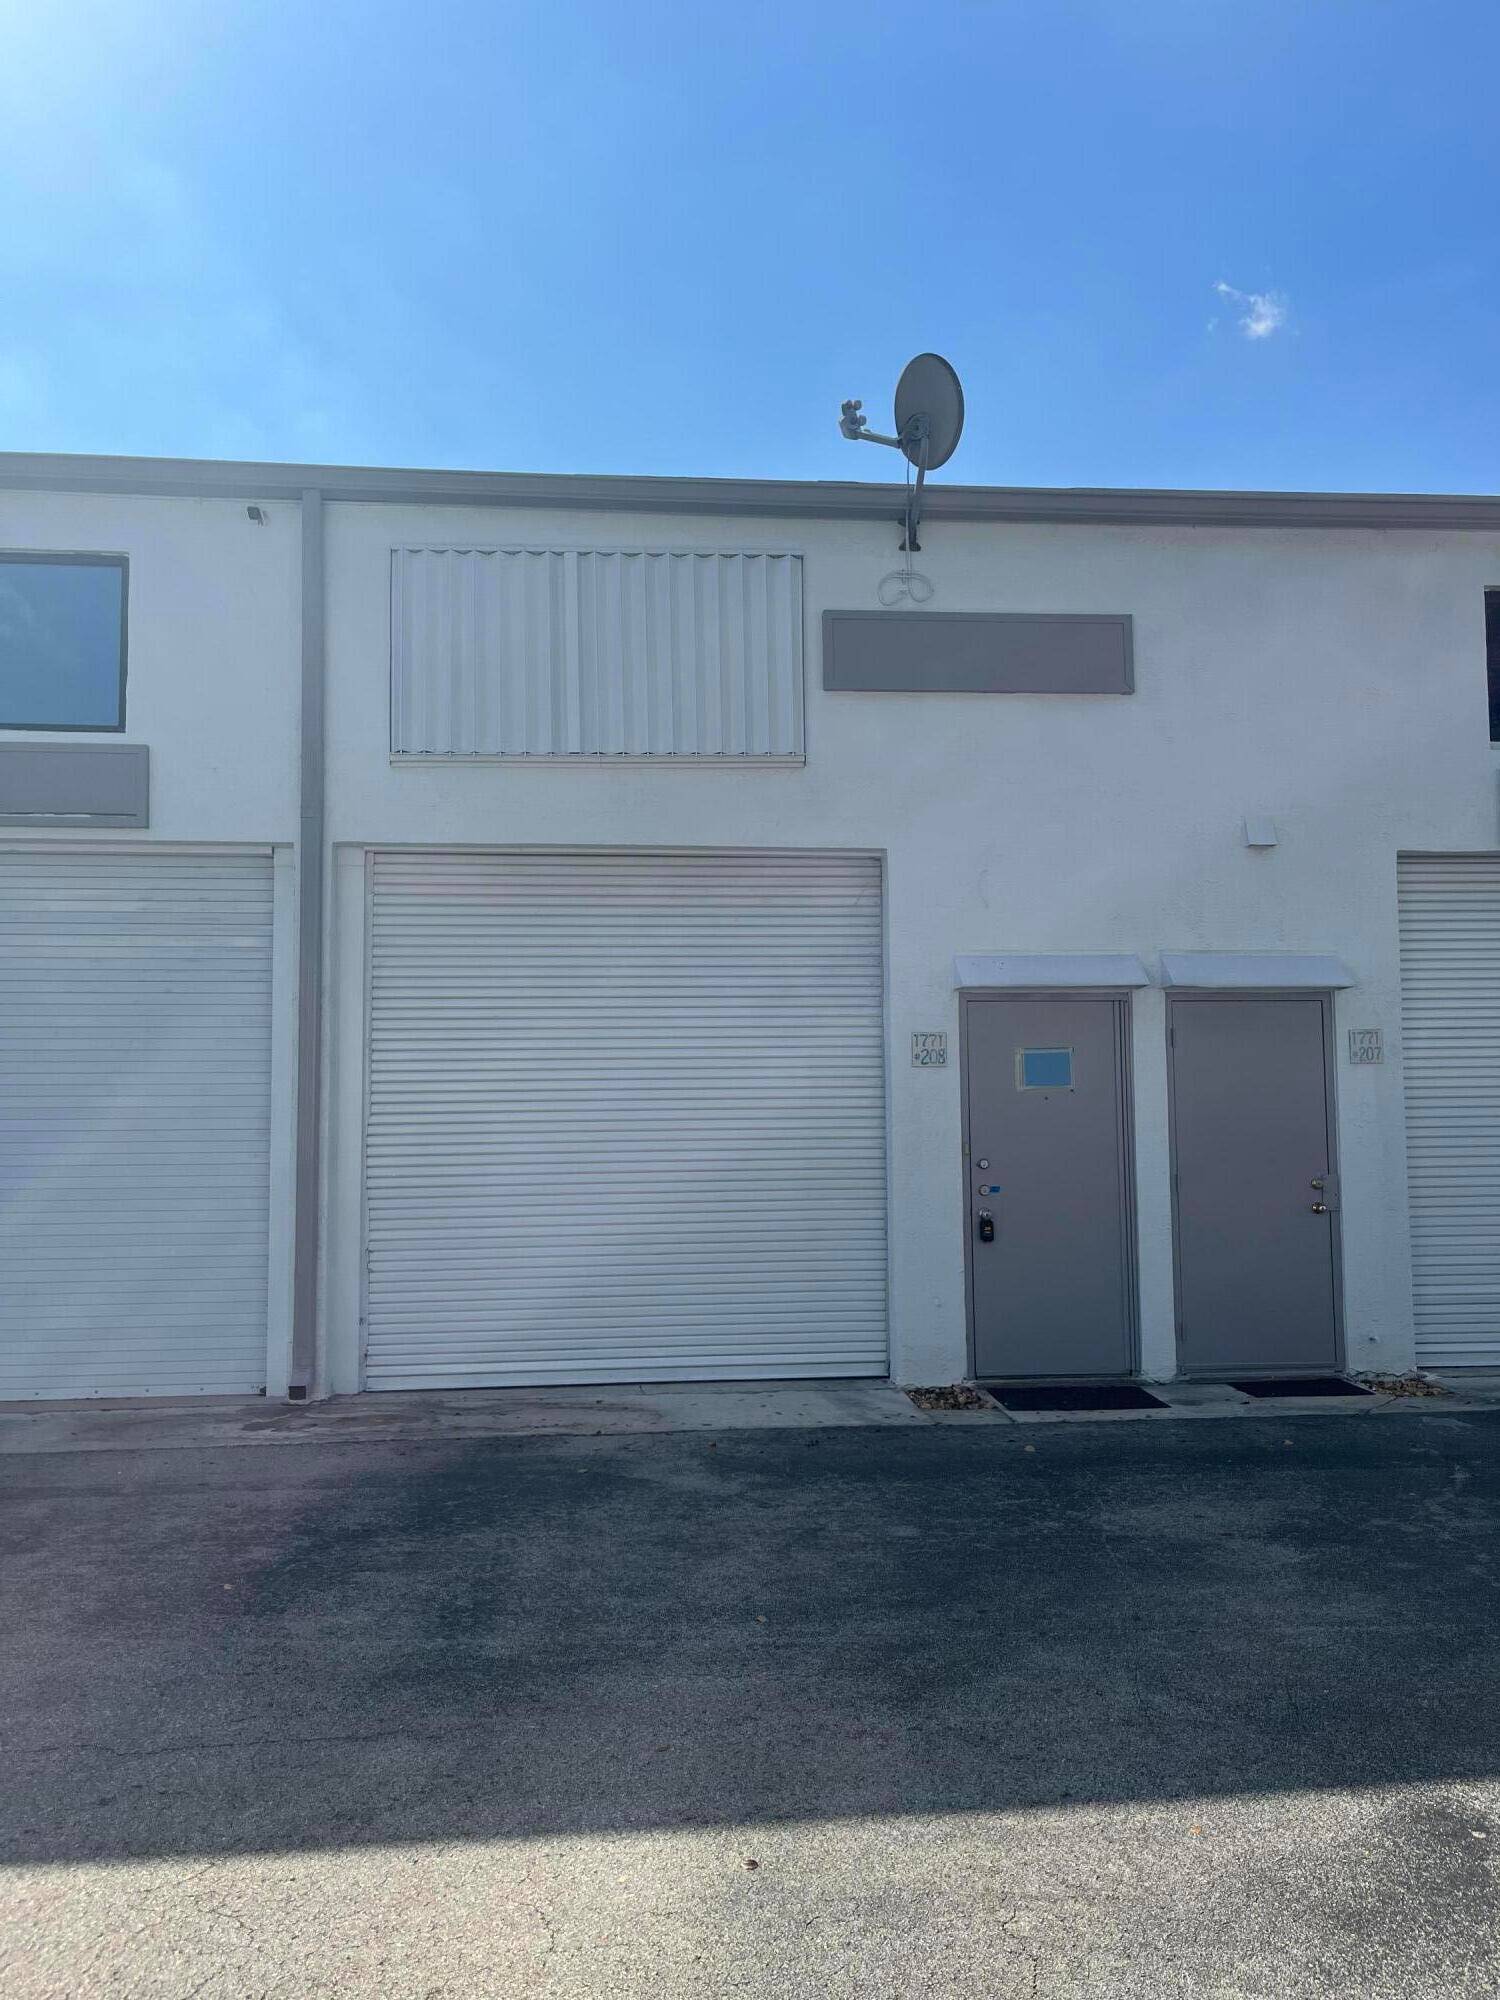 Condo Office Warehouse, Fully Airconditioned Flex Space, I 1 Zoning Conveniently Located Close to the Turnpike 10x10 Grade Level Overhead Door Upstairs Office with Kitchenette and Full Bath with Shower, ...